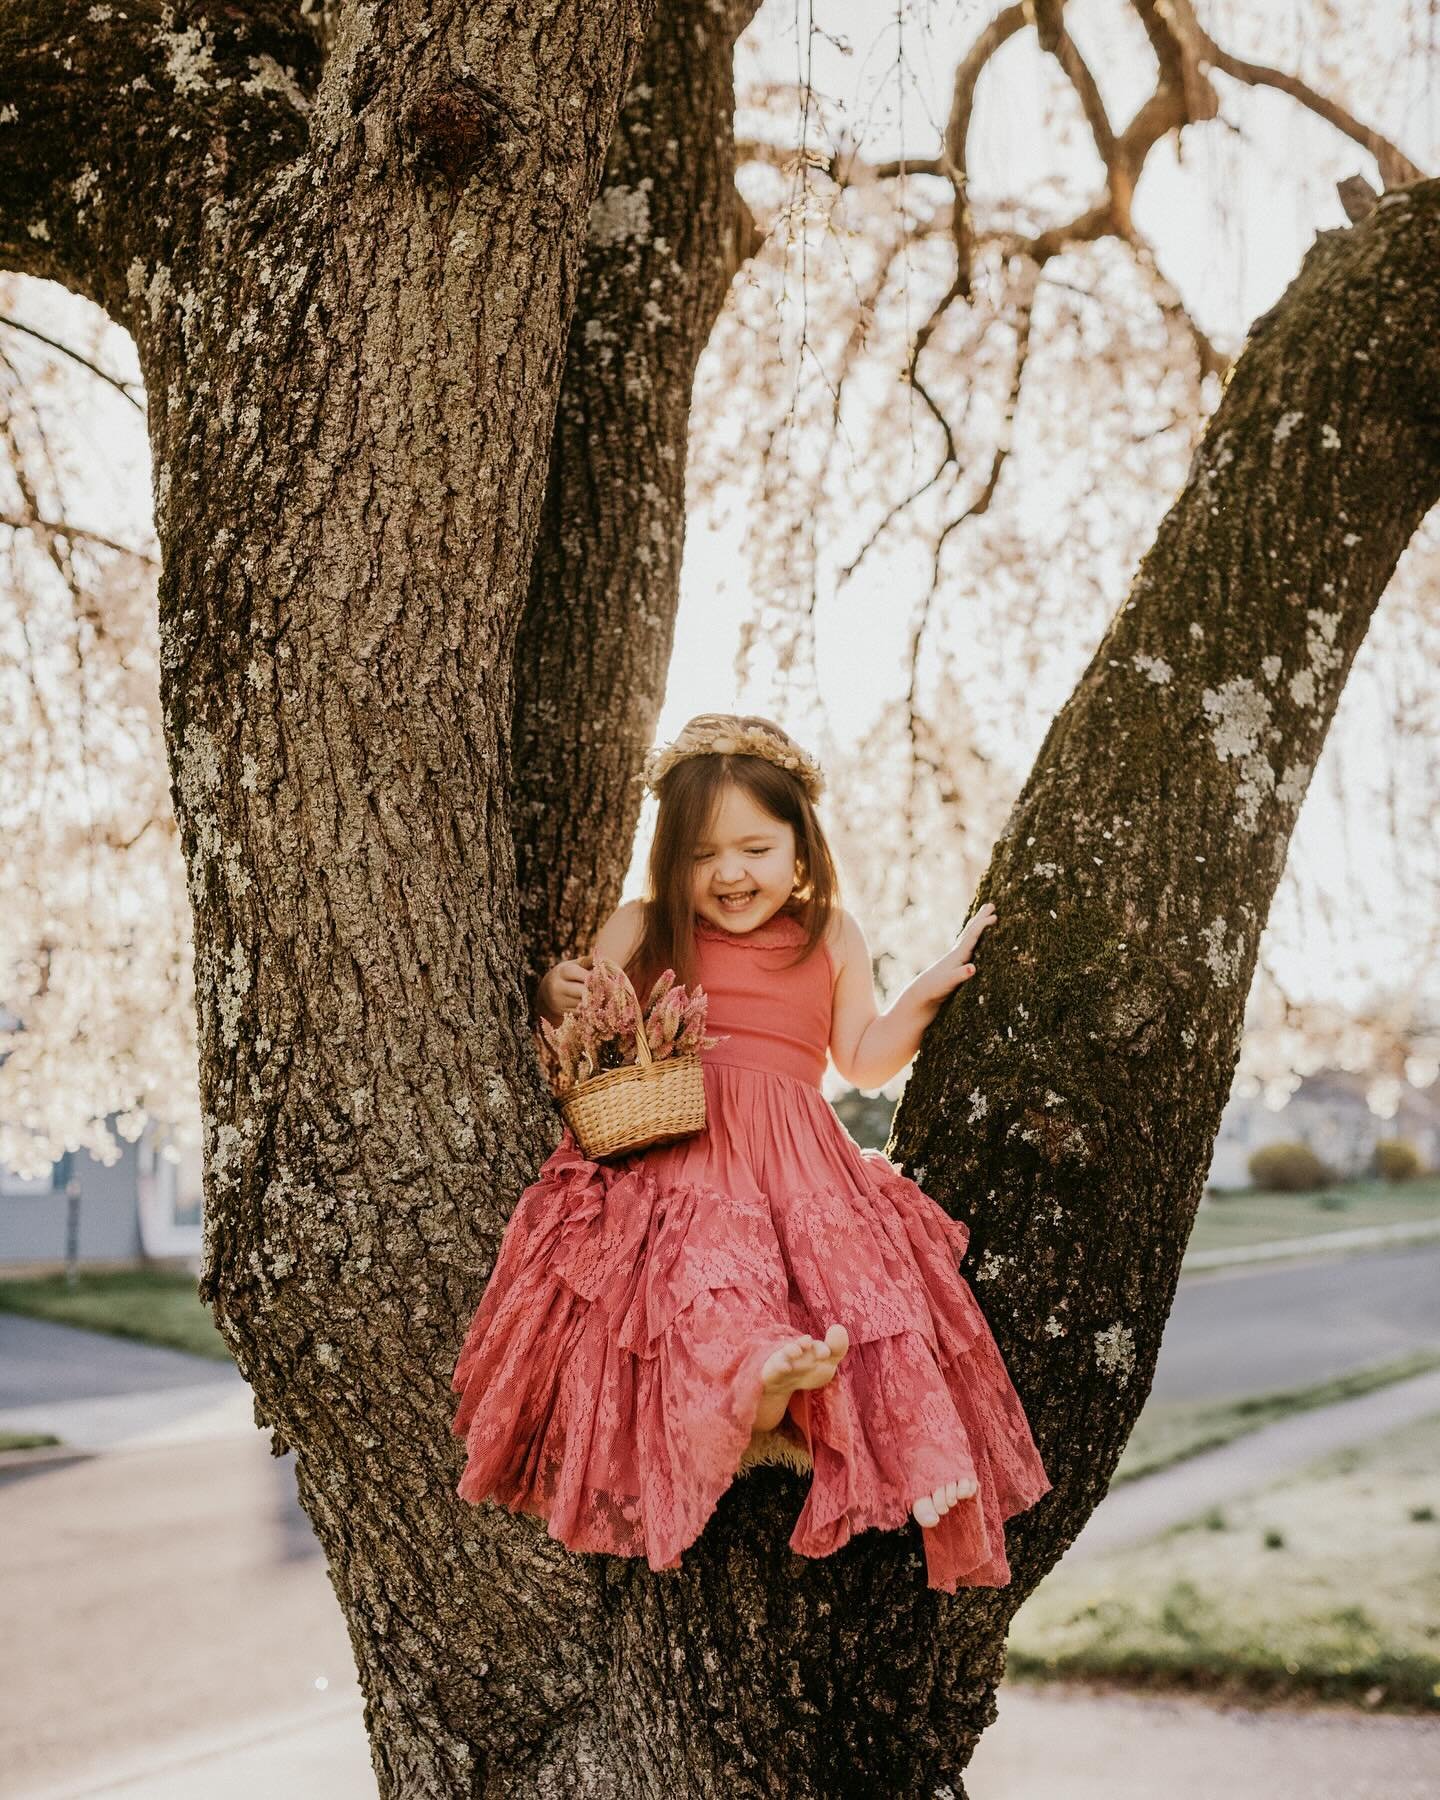 A little redo of a pose I did with my favorite tree and my sweet girl back in 2021. She&rsquo;s finally big enough to sit up there by herself. 
.
.⠀⠀⠀⠀⠀⠀⠀
#theartofchildhood #childhoodwonders #dearphotographer #childhoodofnostalgia #tinybigadventure 